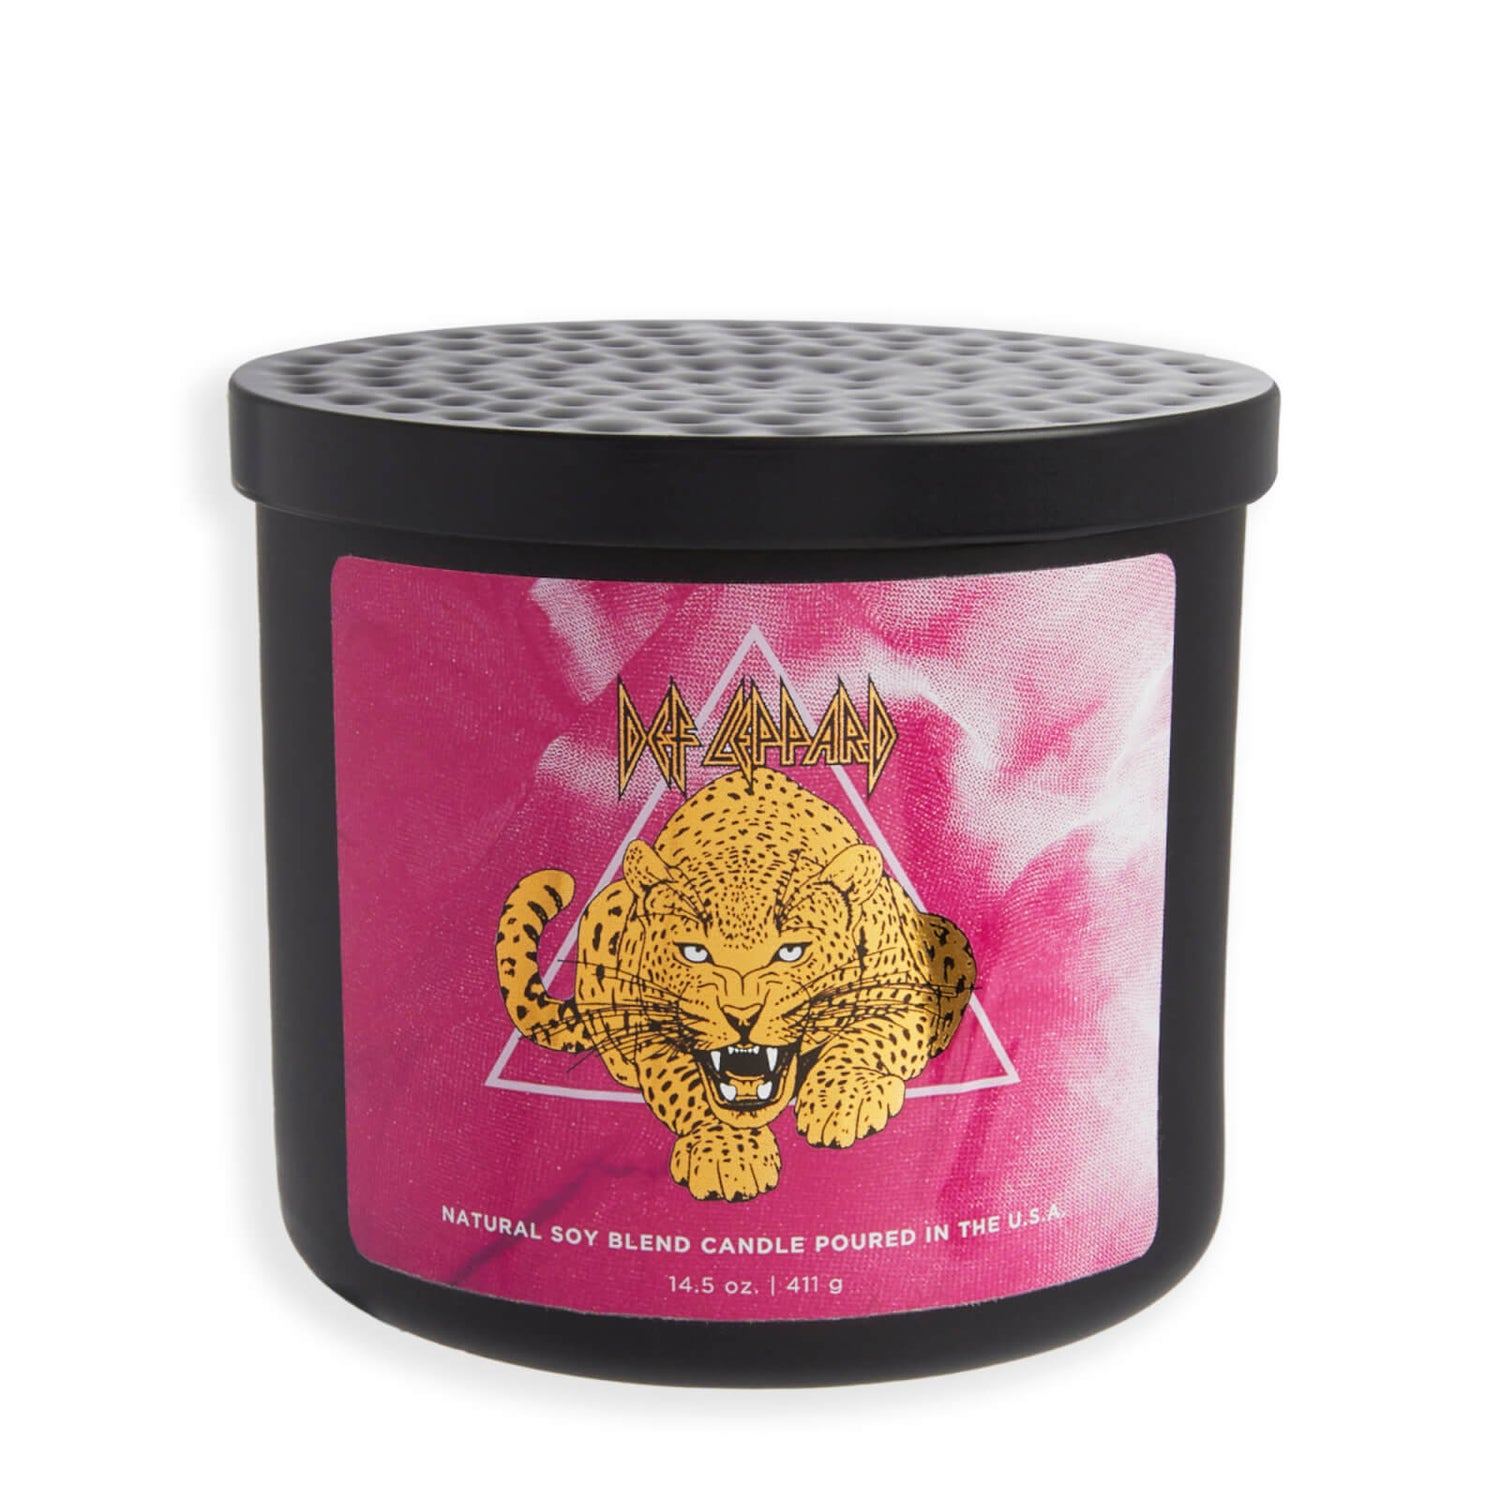 Rock & Roll Beauty Def Leppard Pink Leppard Candle